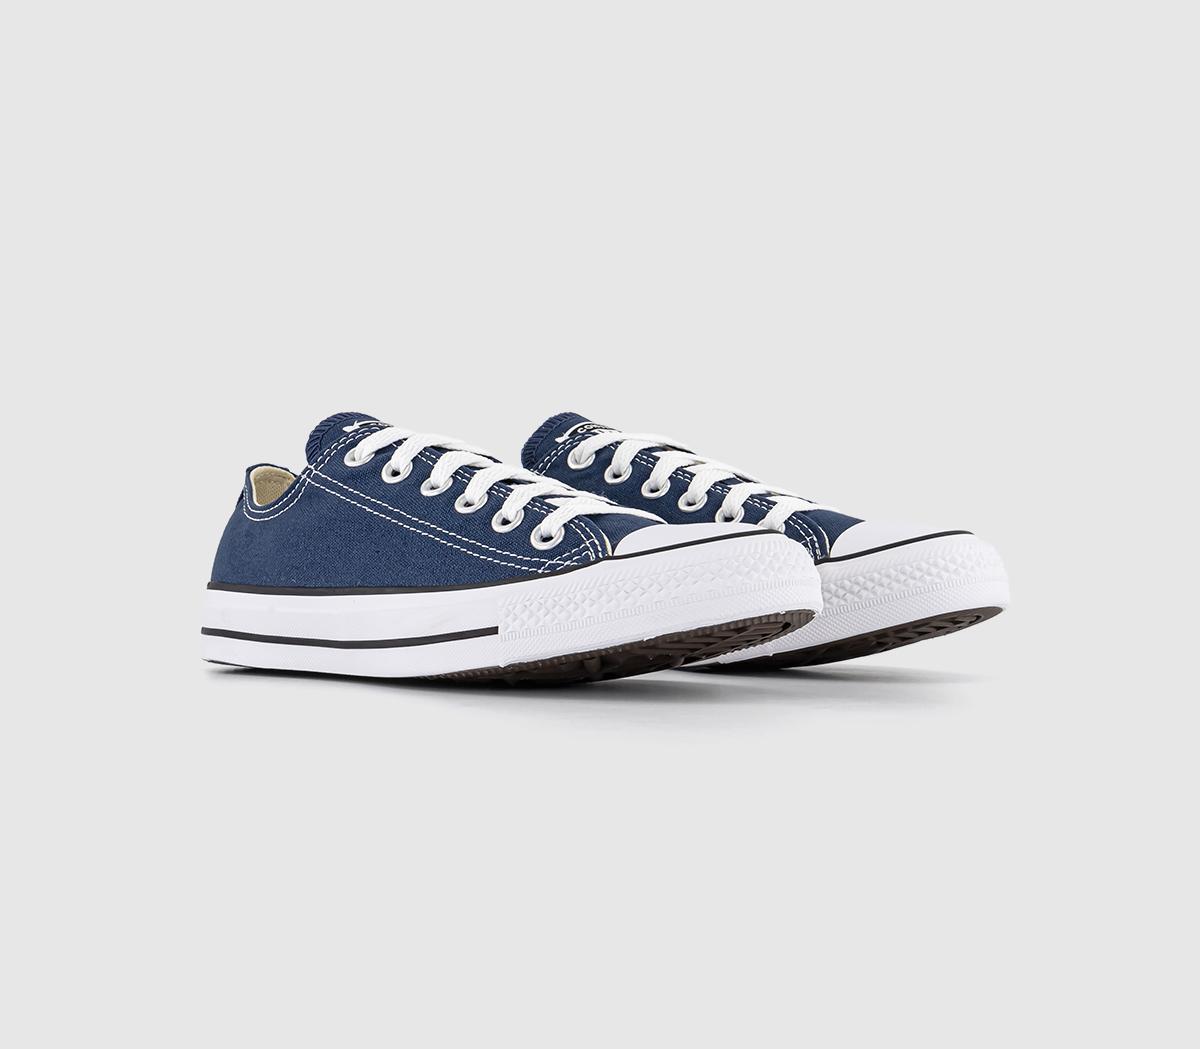 Mens Converse Kids All Star Low Canvas Trainers In Navy Blue And White, 5